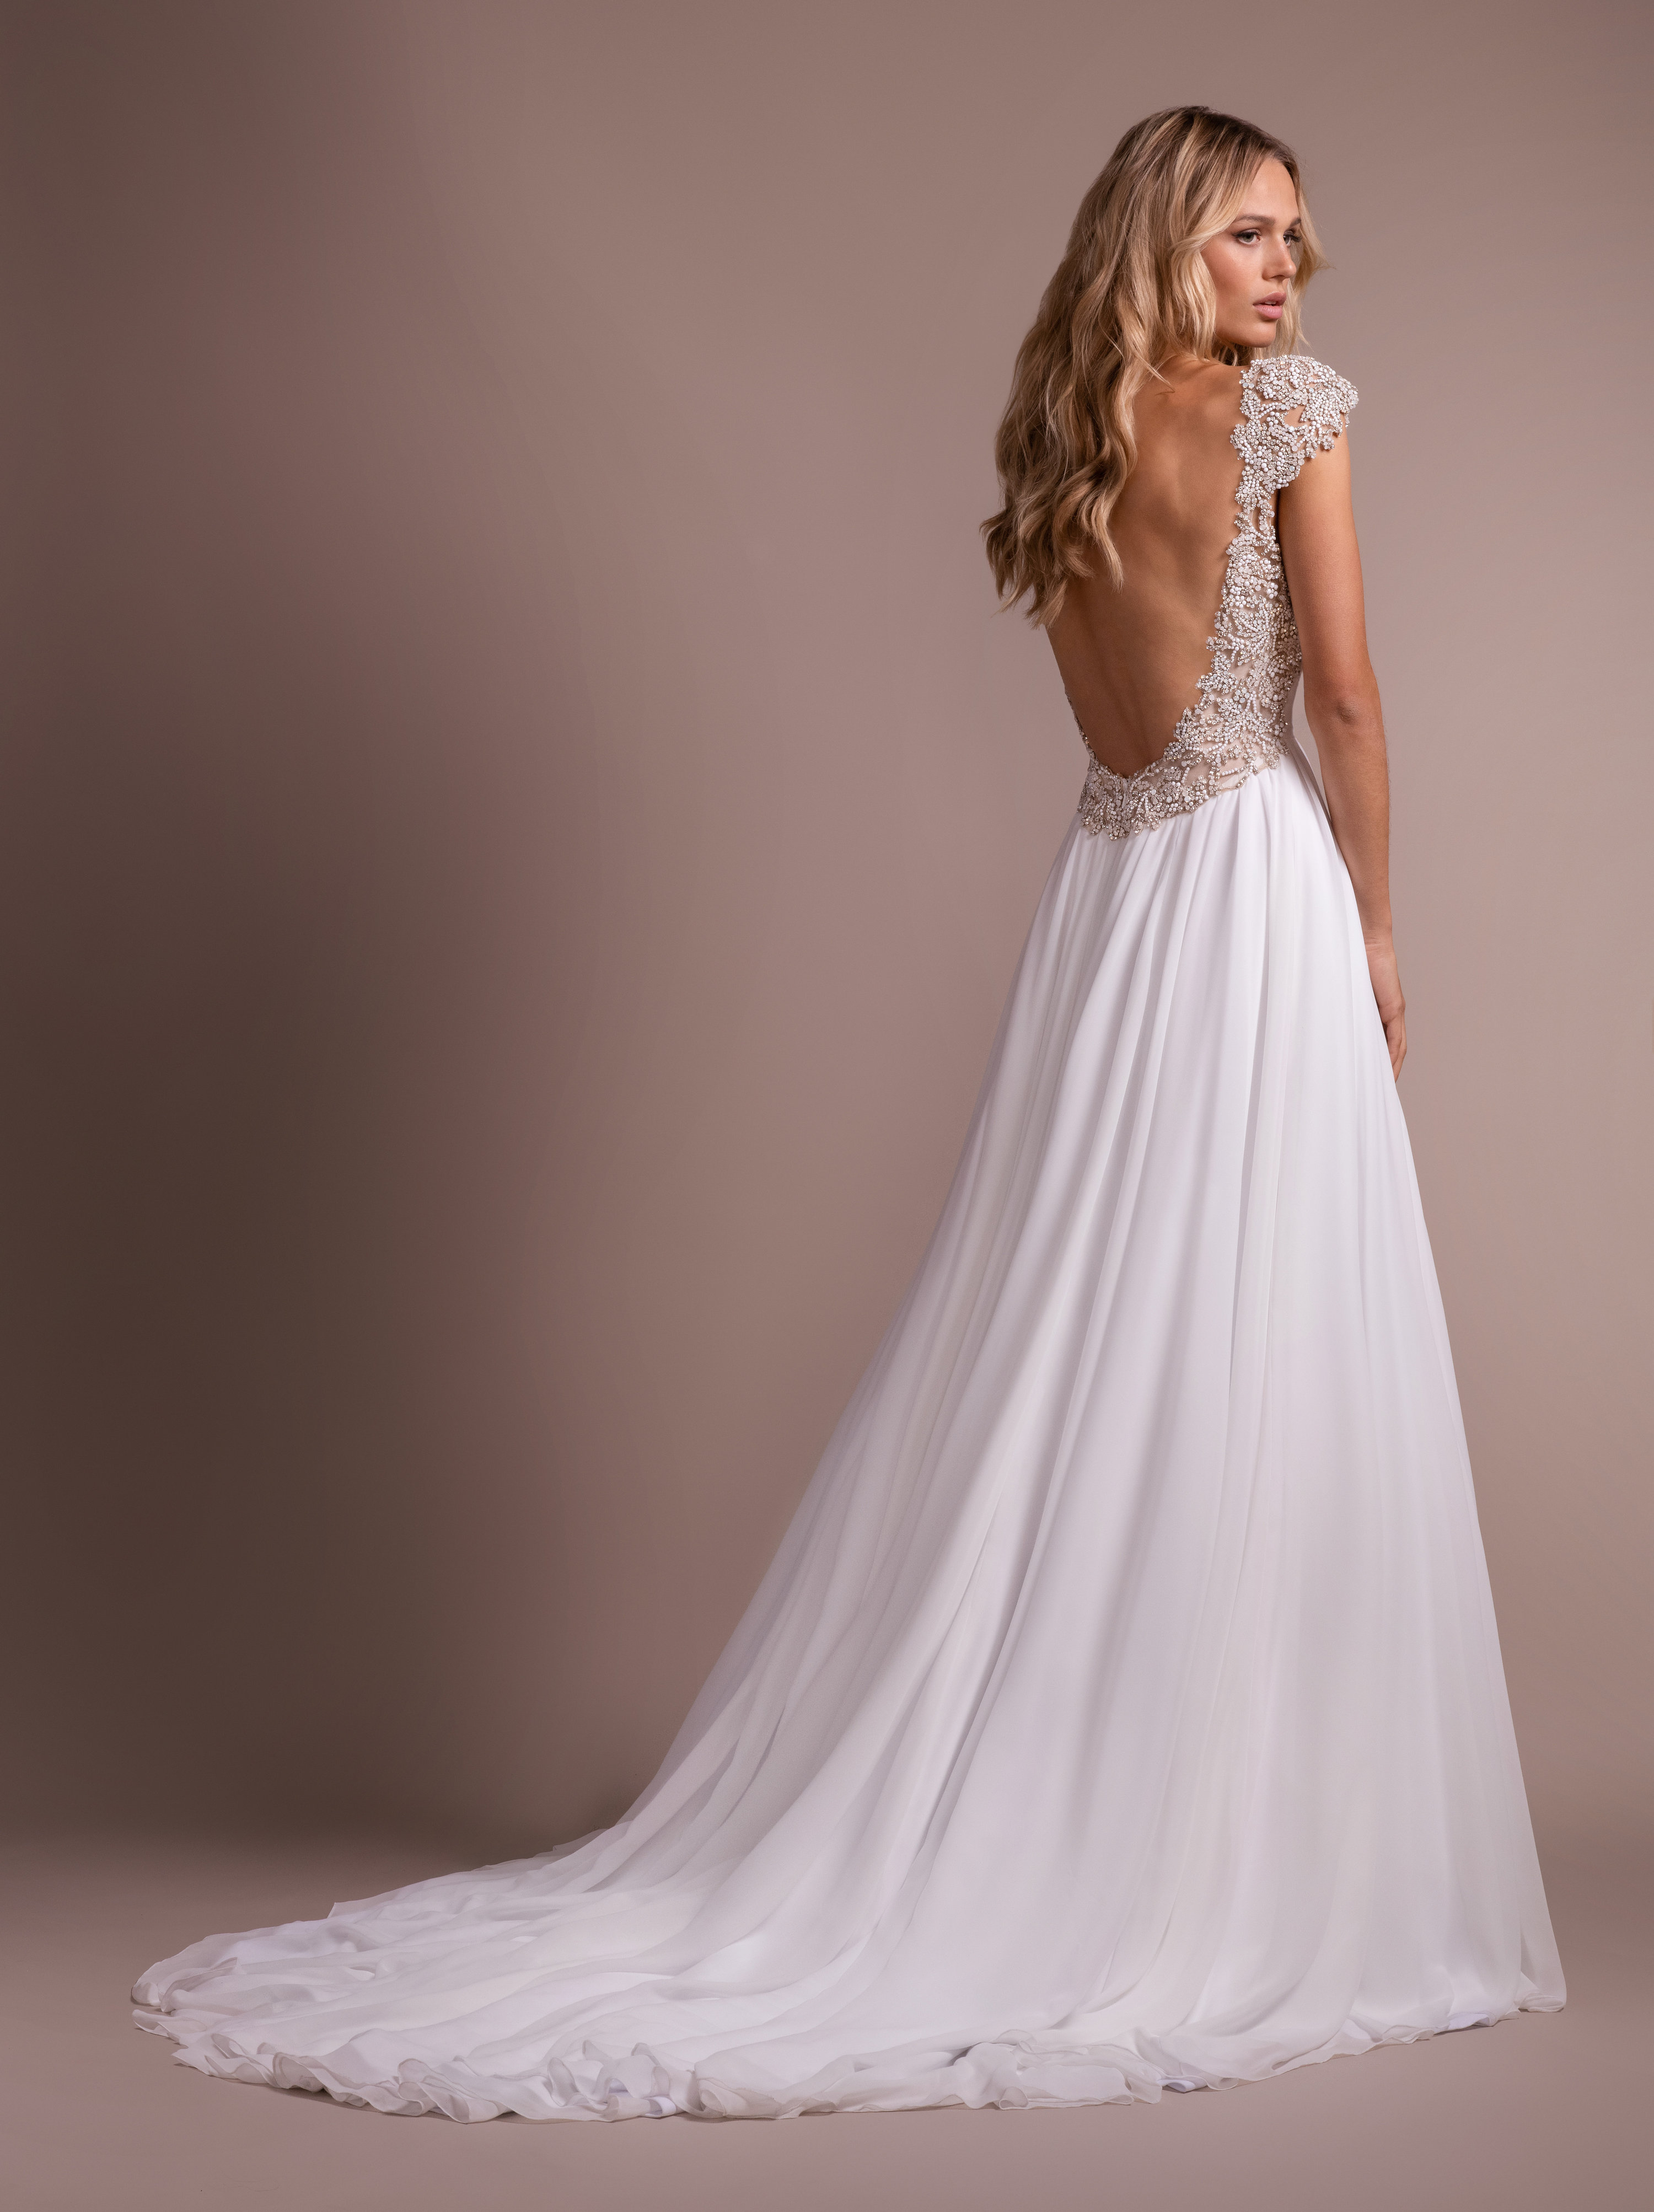 hayley paige kemper gown price